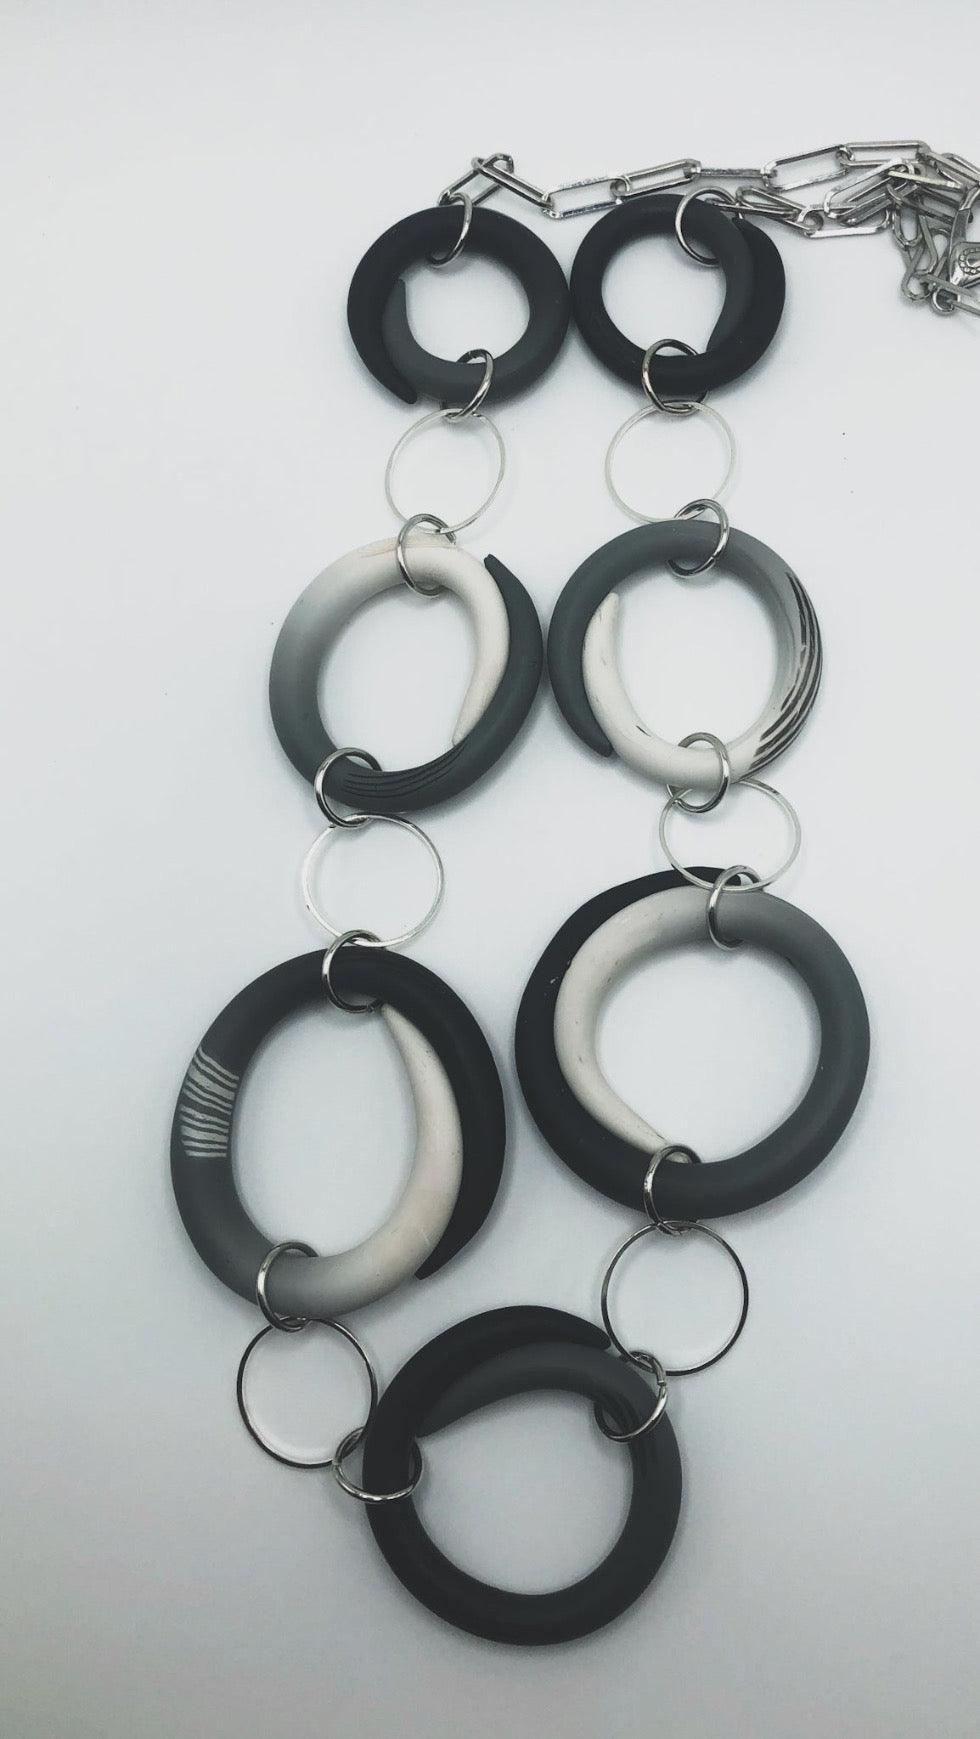 Infinity Necklace - Black & White - On Sale - The Art of Lori Axelrod